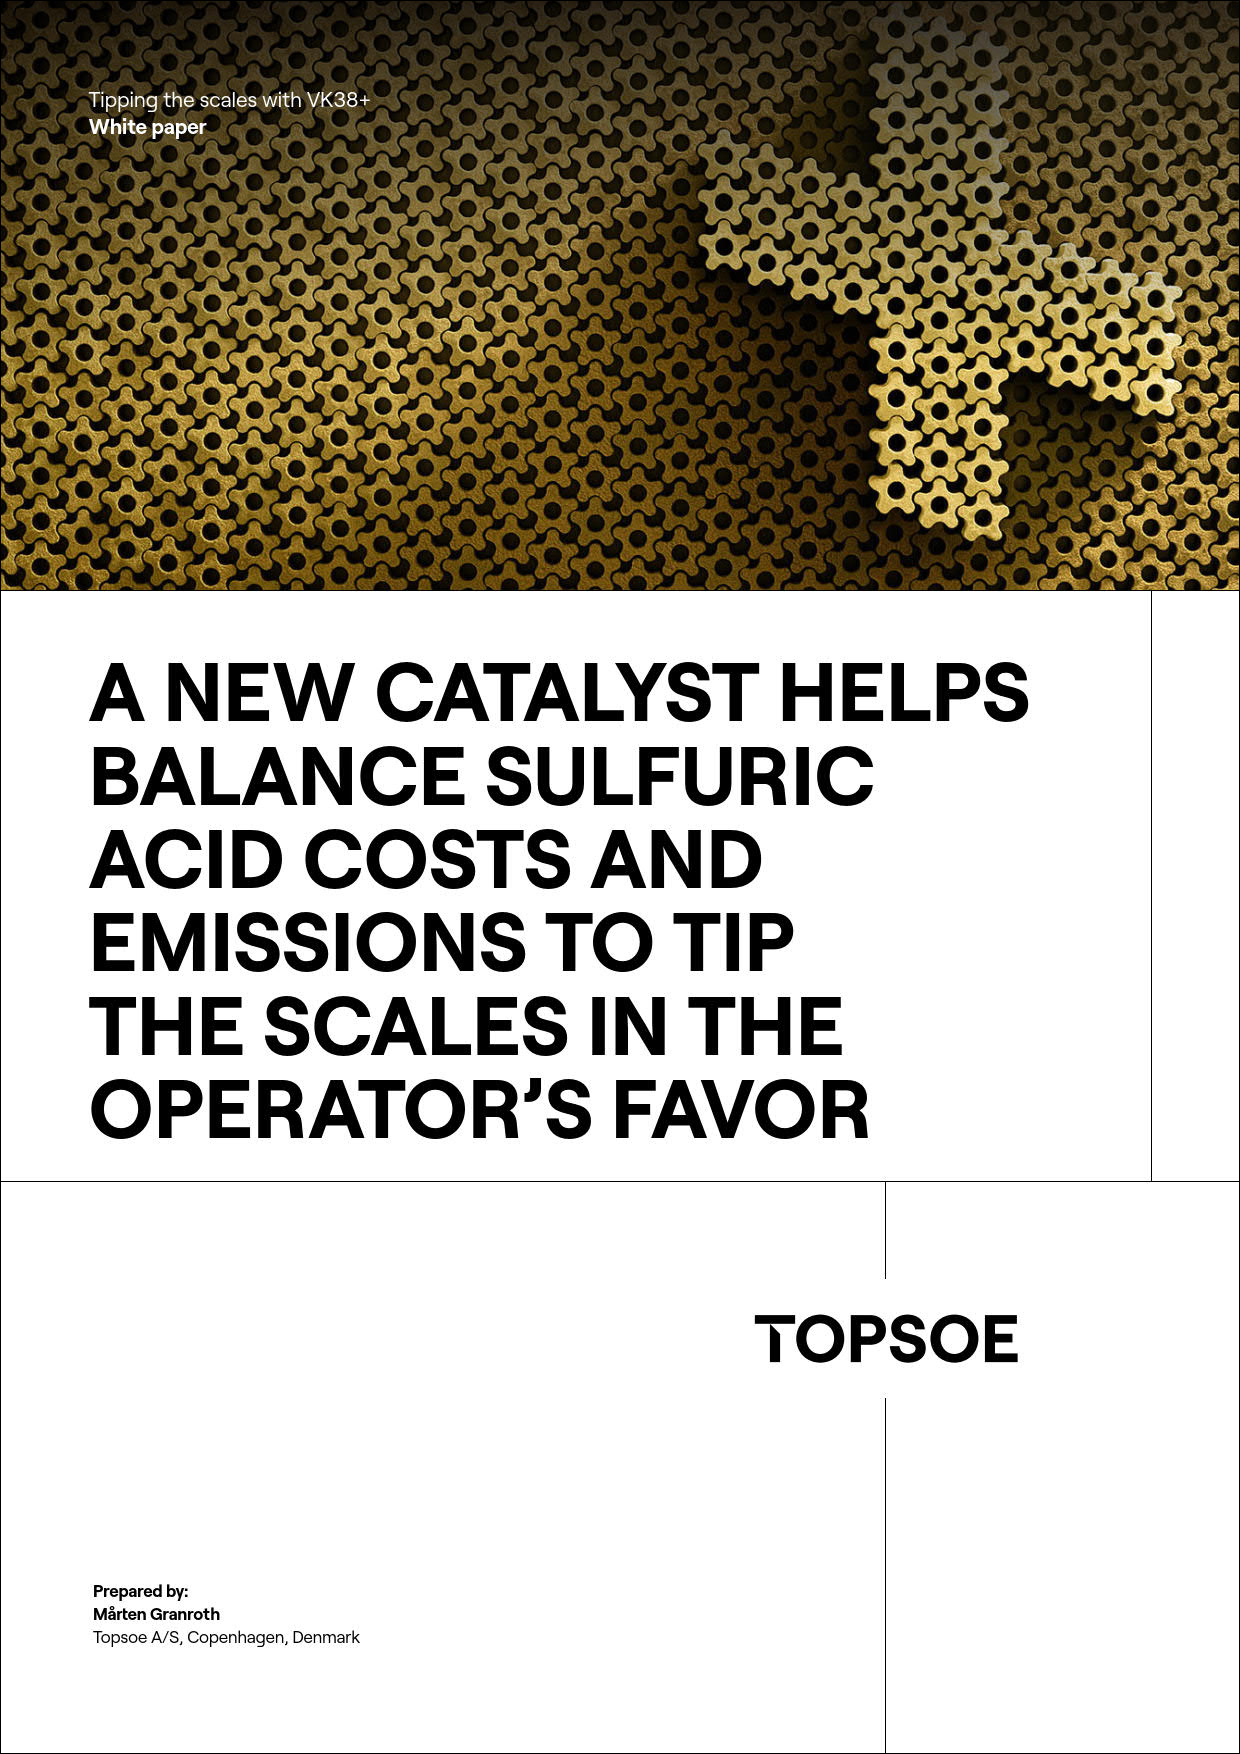 Tip the scales - get more from your sulfuric acid catalyst expenses with VK38+